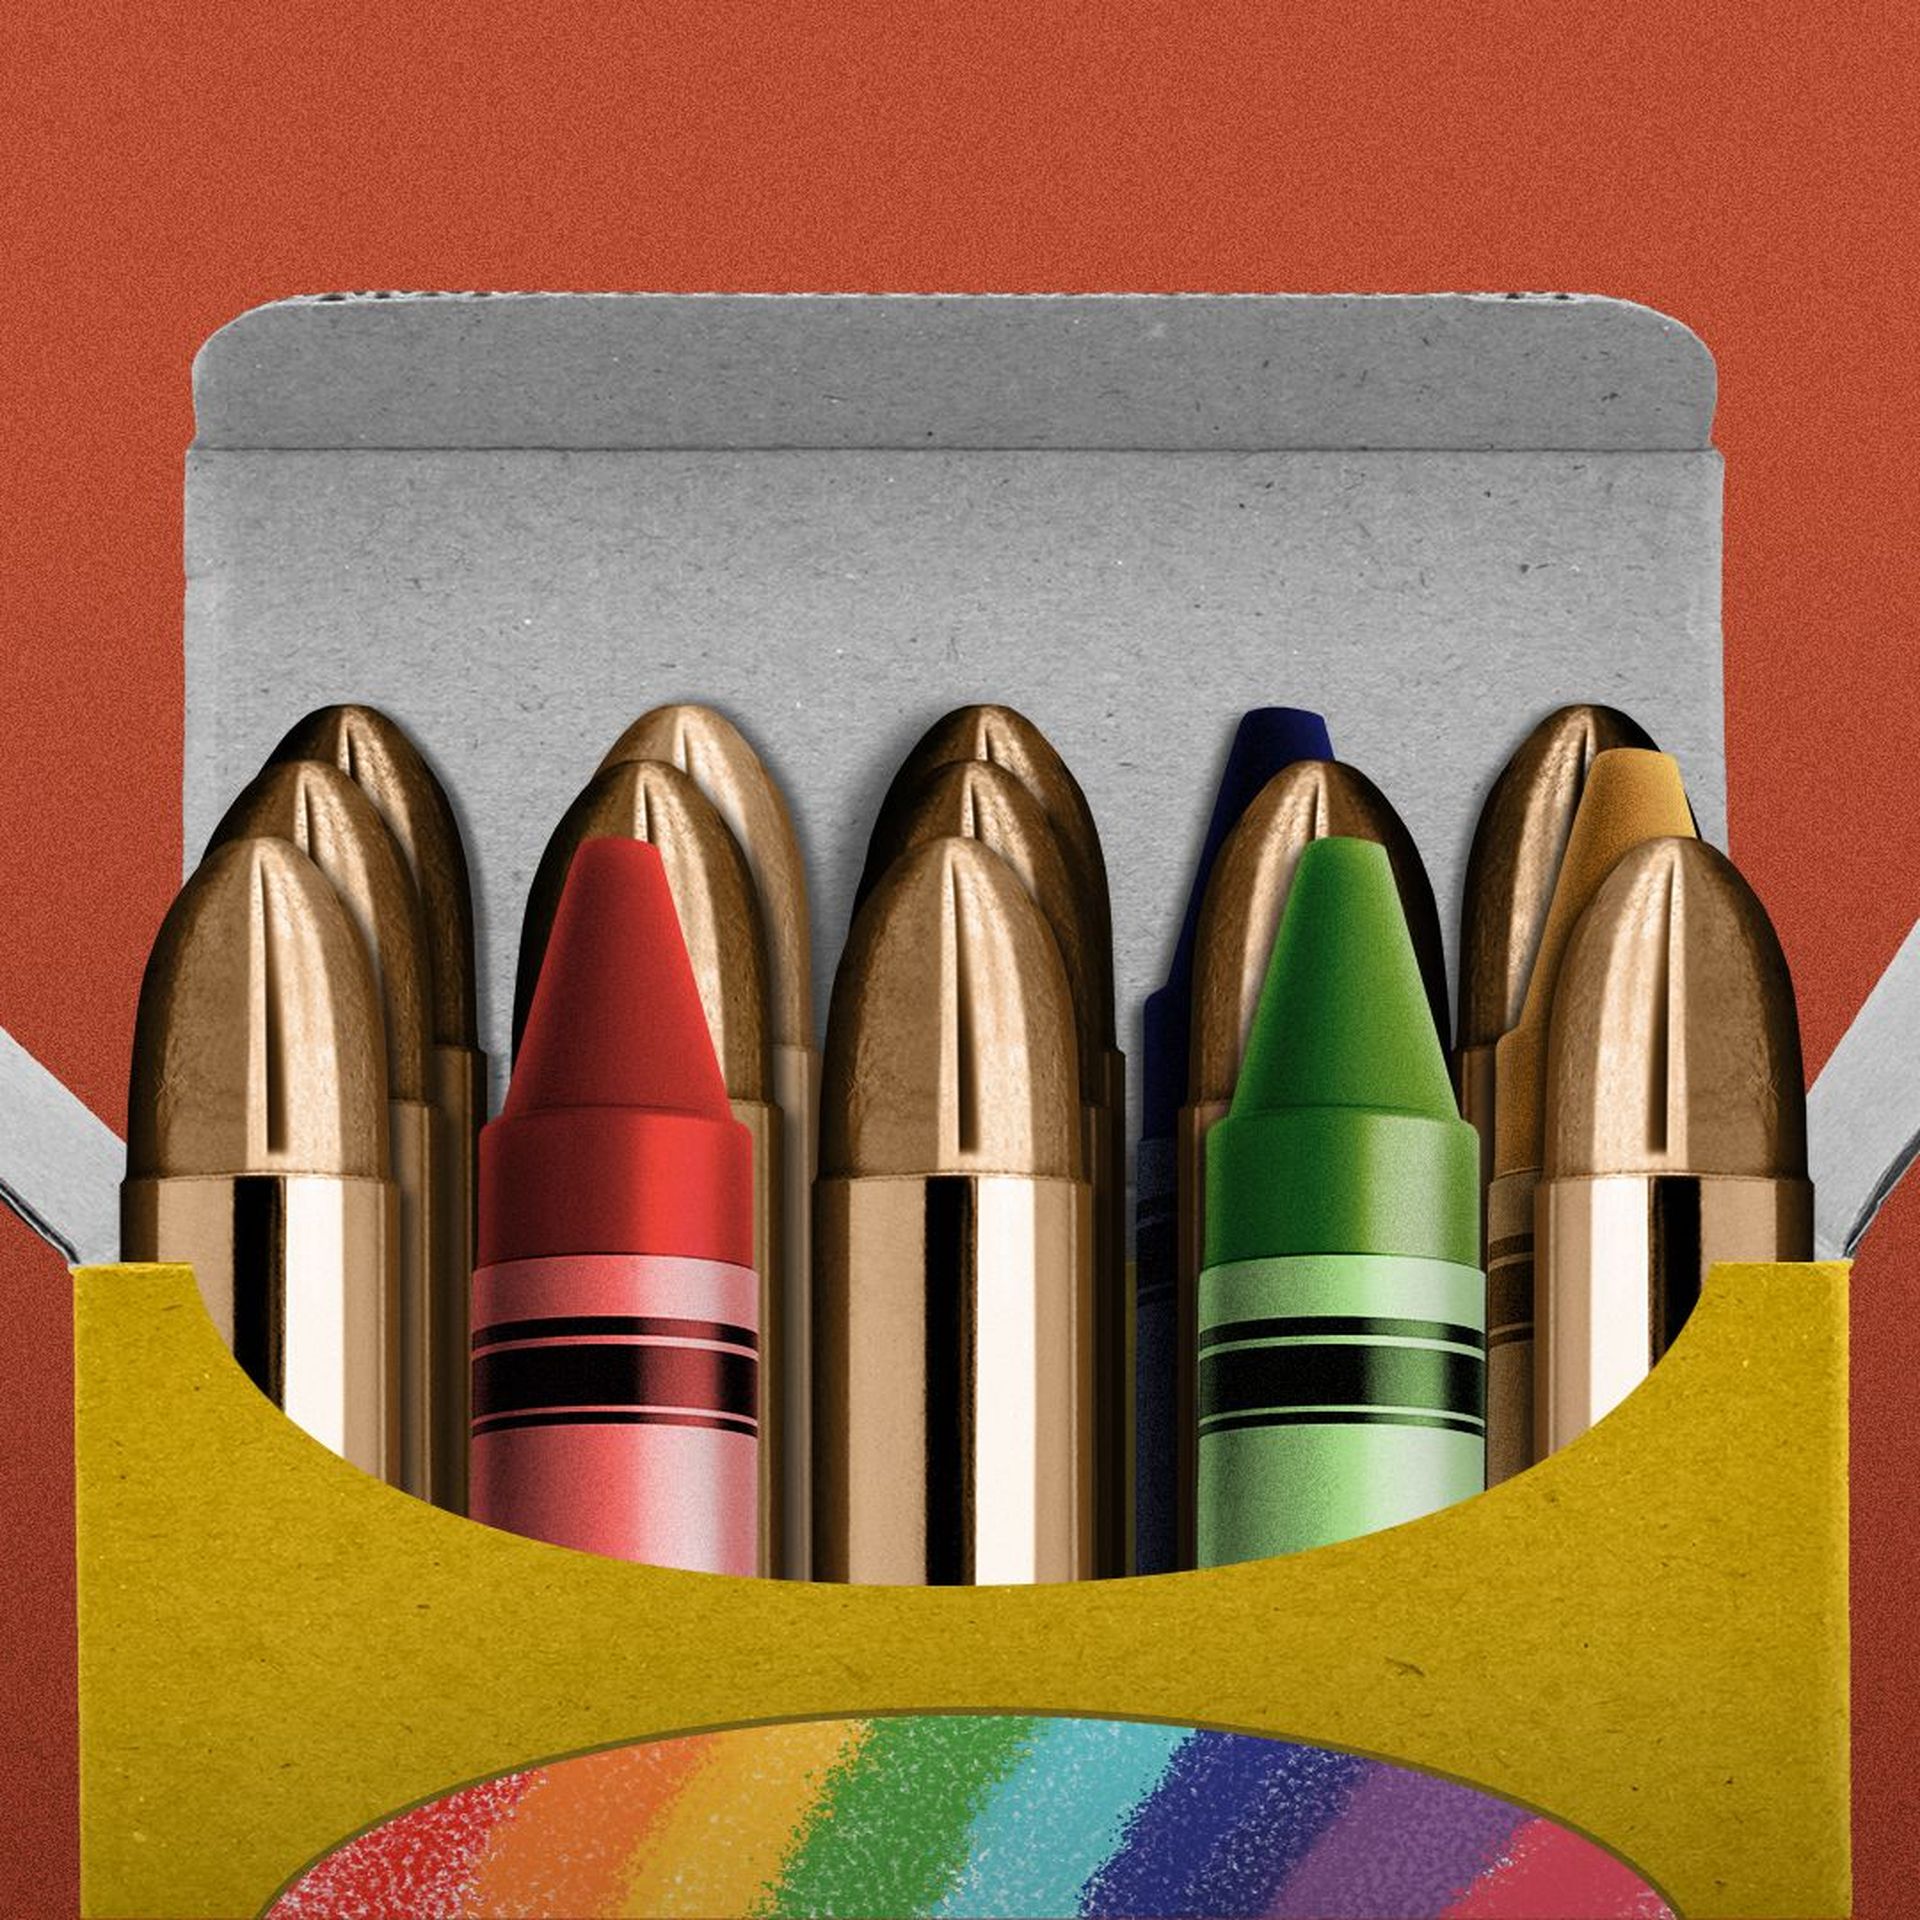 Illustration of bullets and crayons in a crayon box.